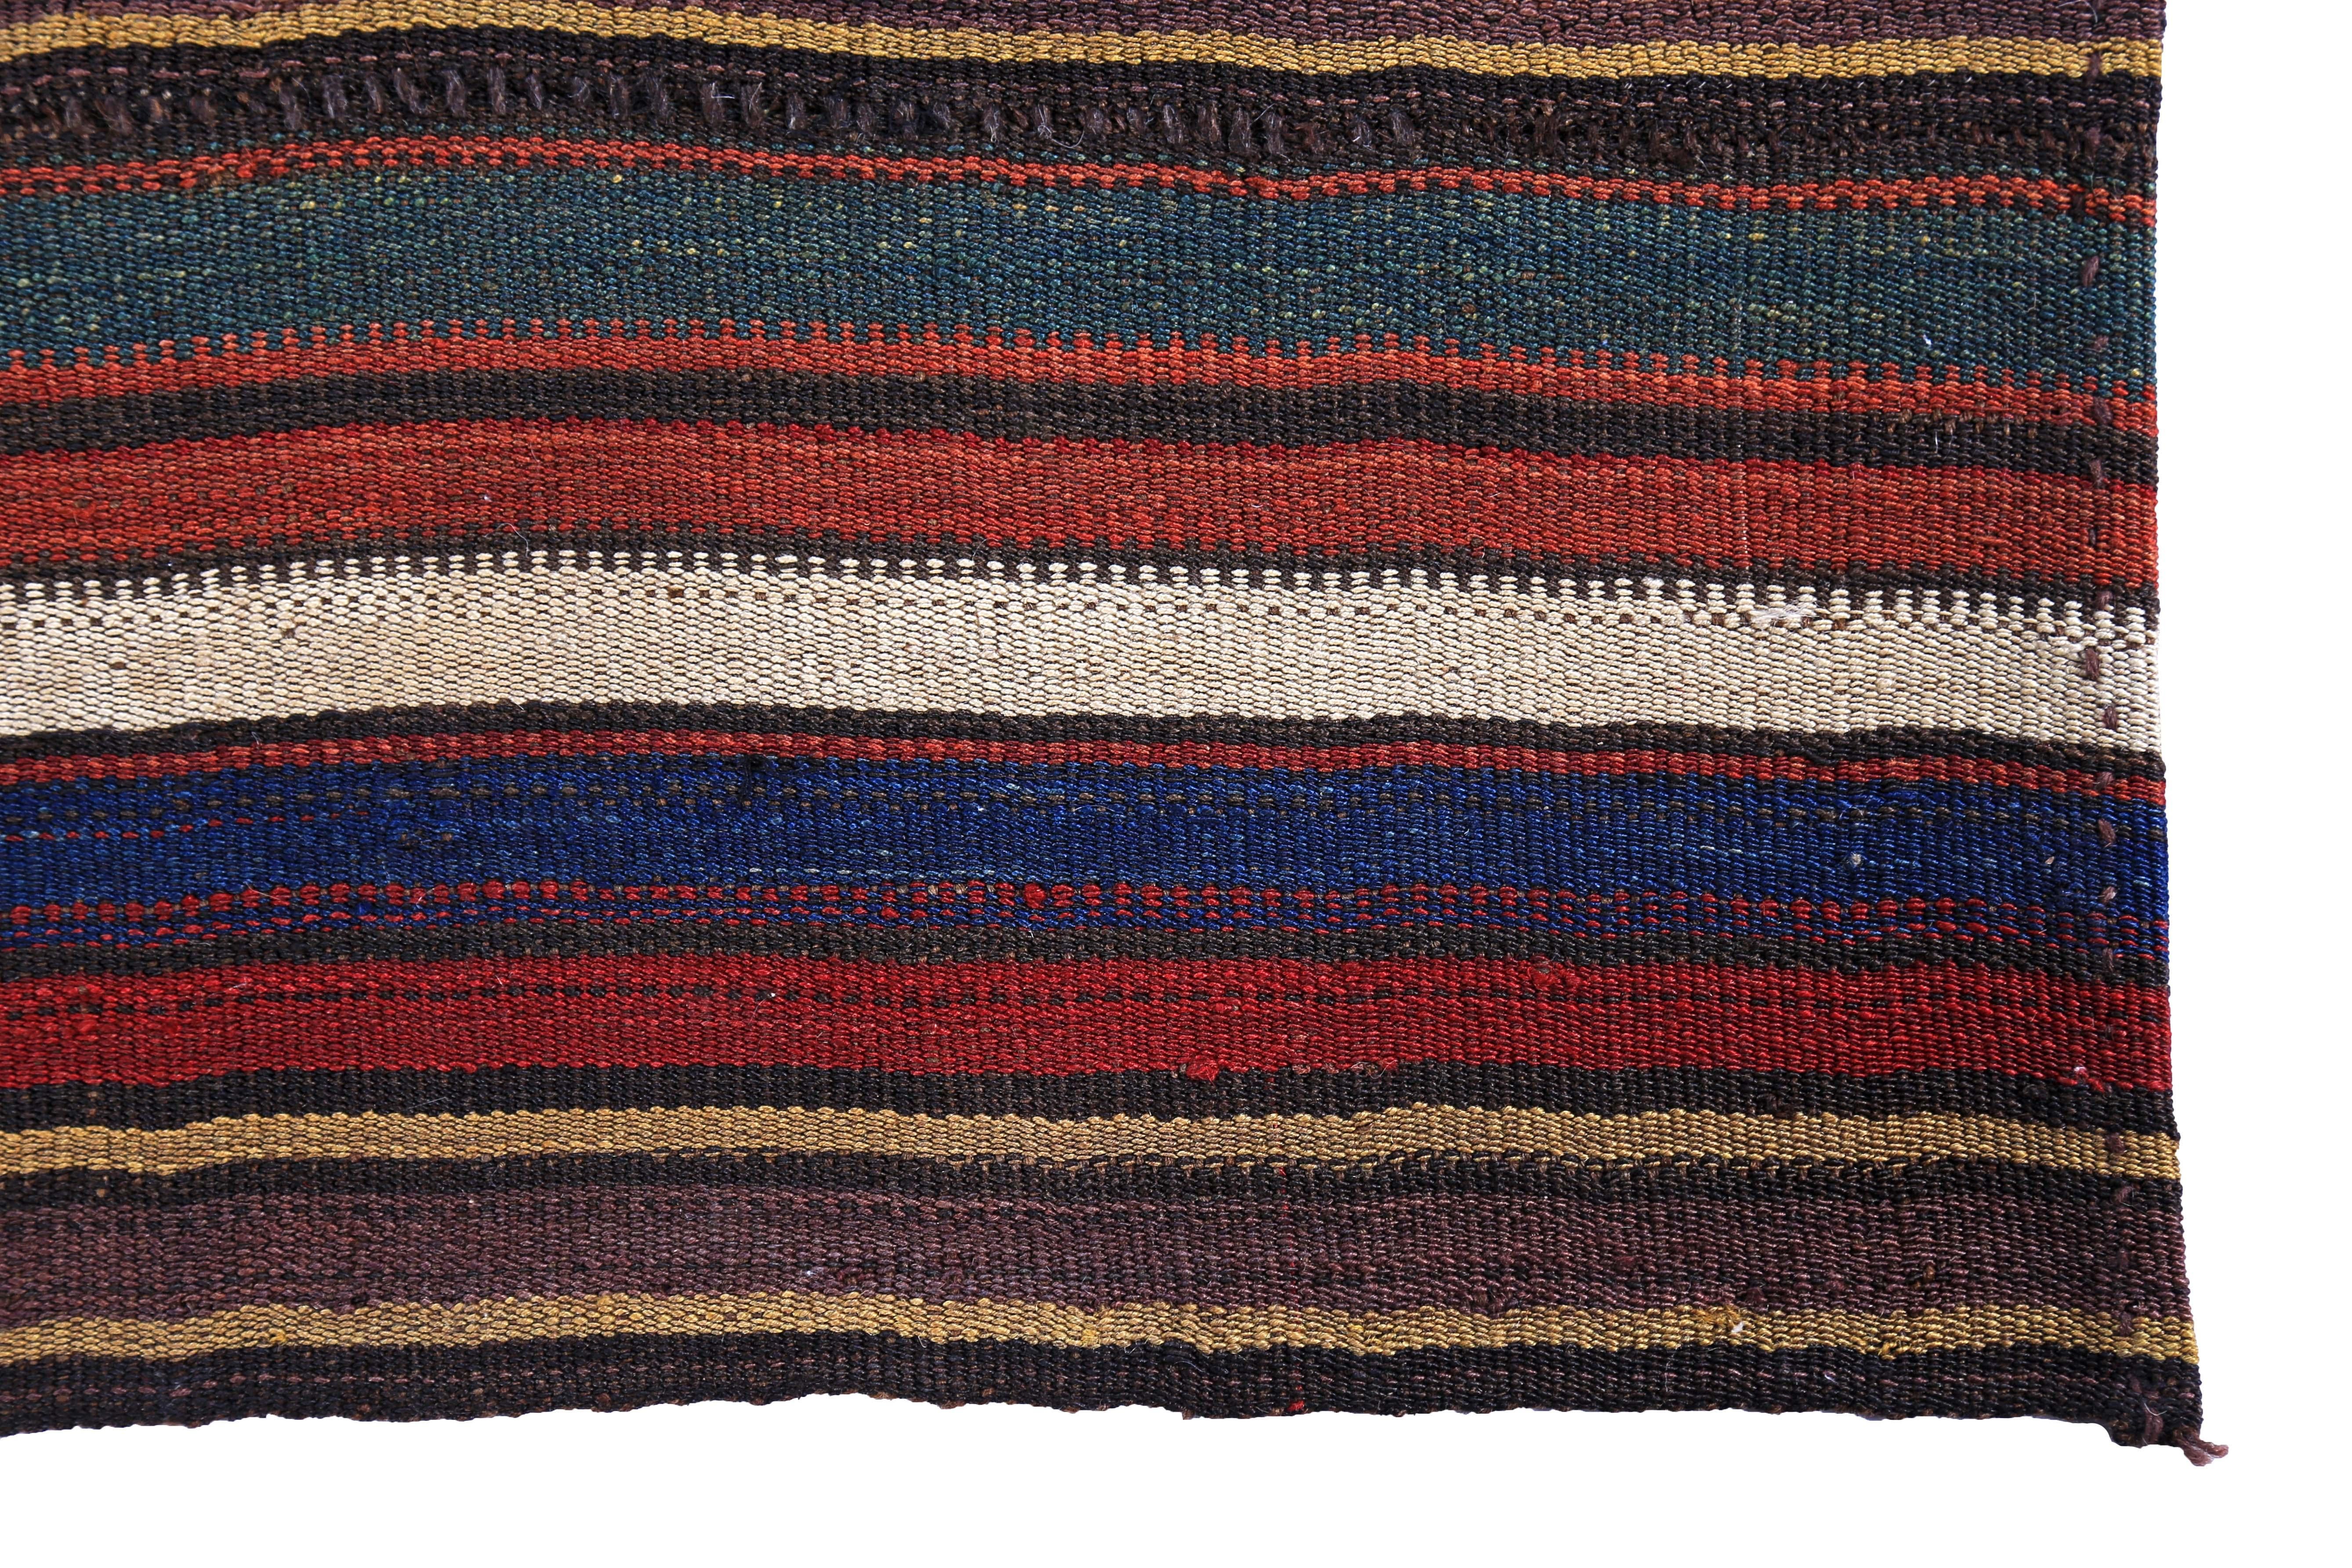 Hand-Woven Modern Turkish Kilim Rug with Red, Blue and Beige Stripes For Sale